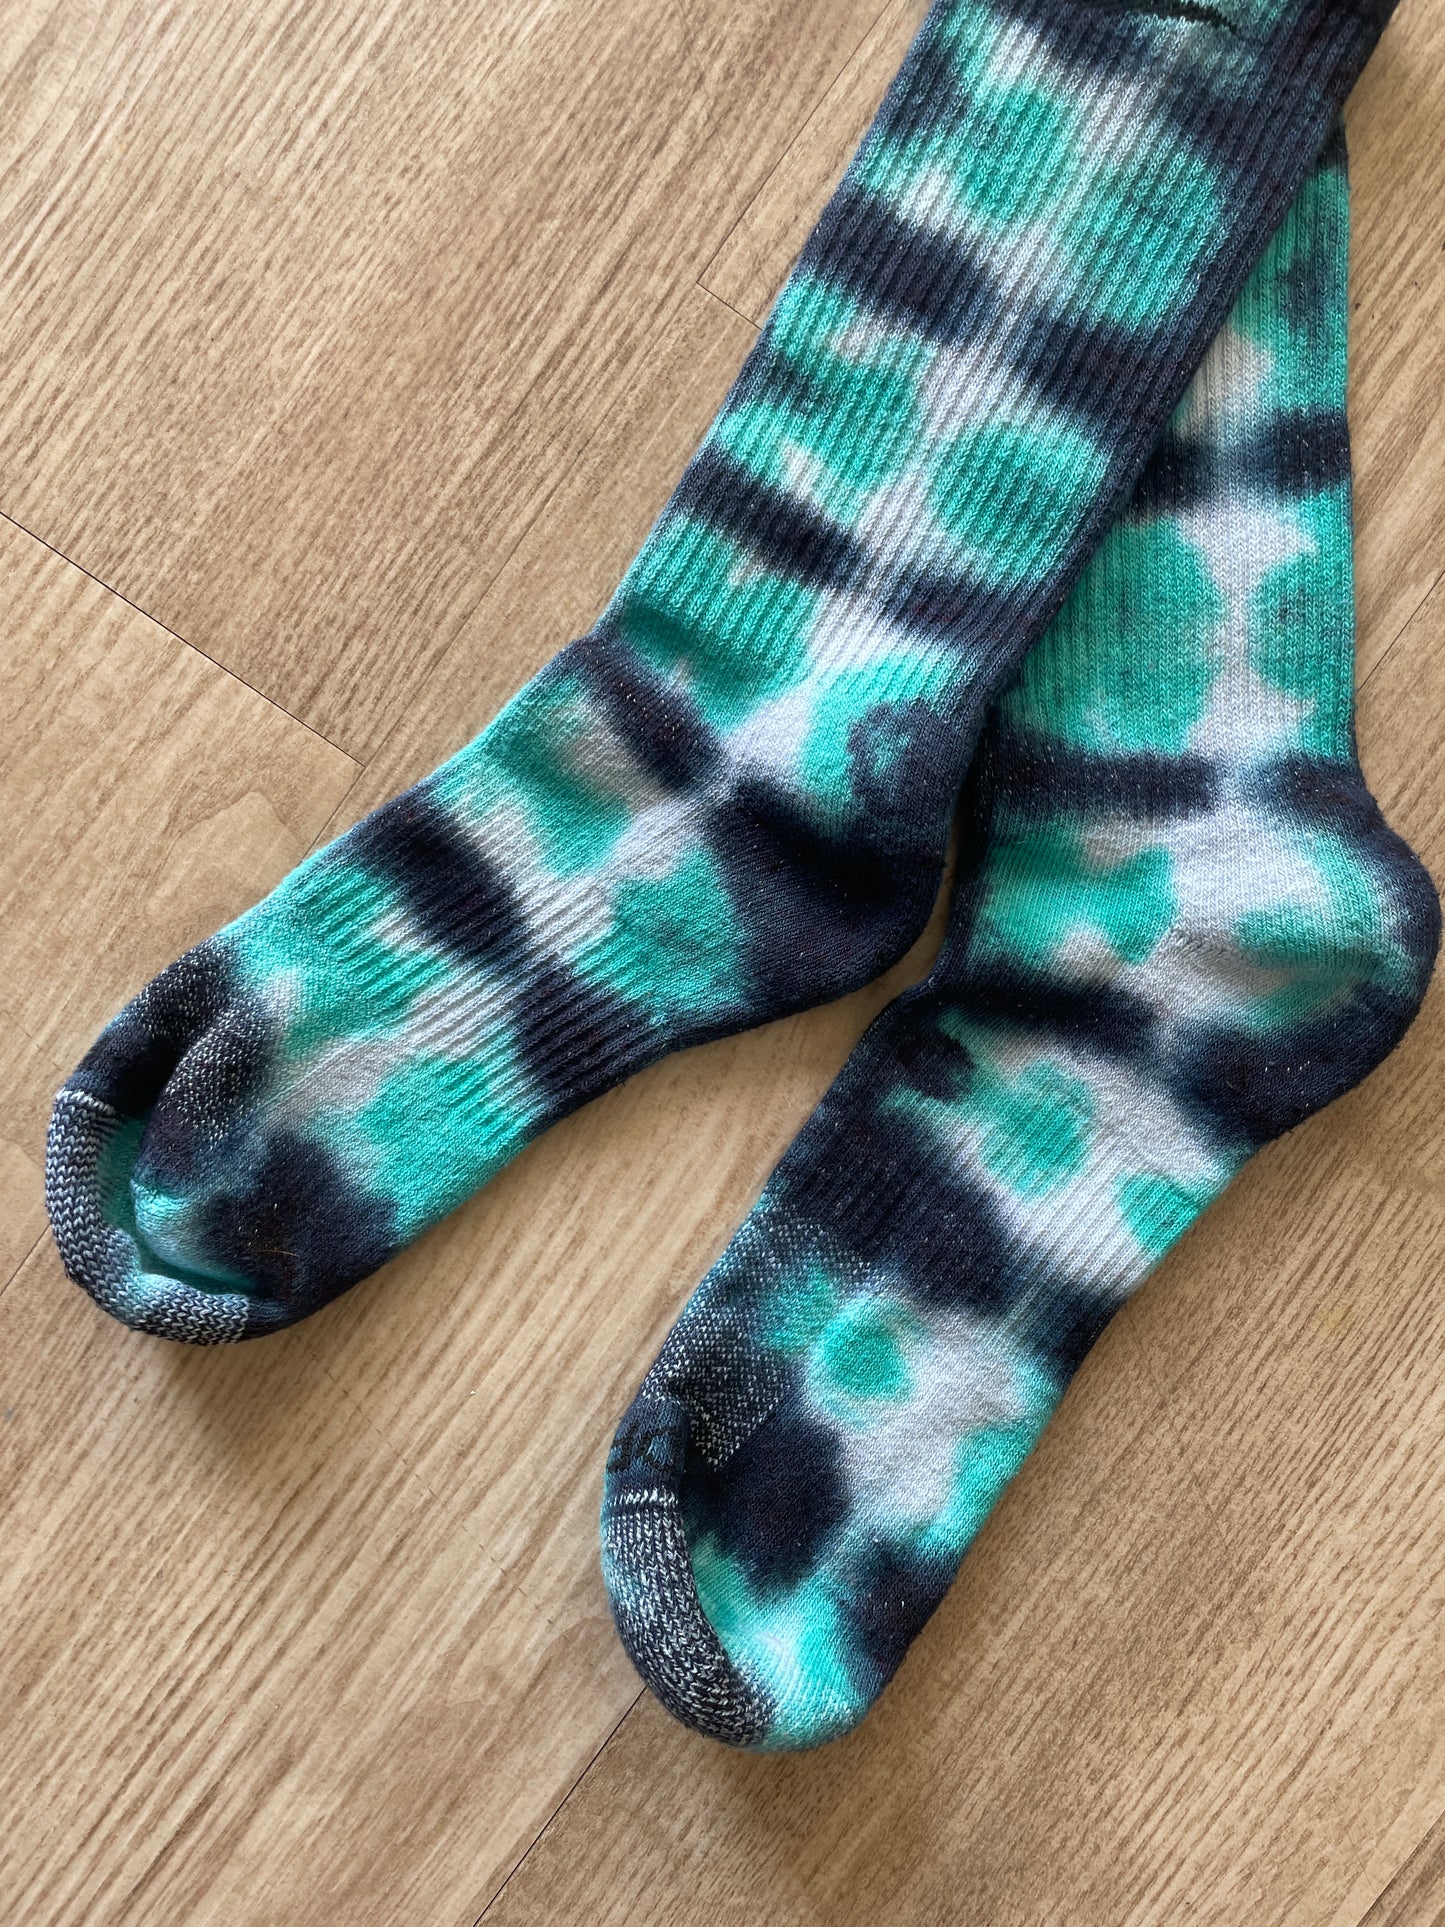 NIKE Socks Hand Tie Dyed Black and Teal Nike Dri-FIT Everyday Plus Crew Training Socks - Size Large (Men's 8-12/Women's 10-13)